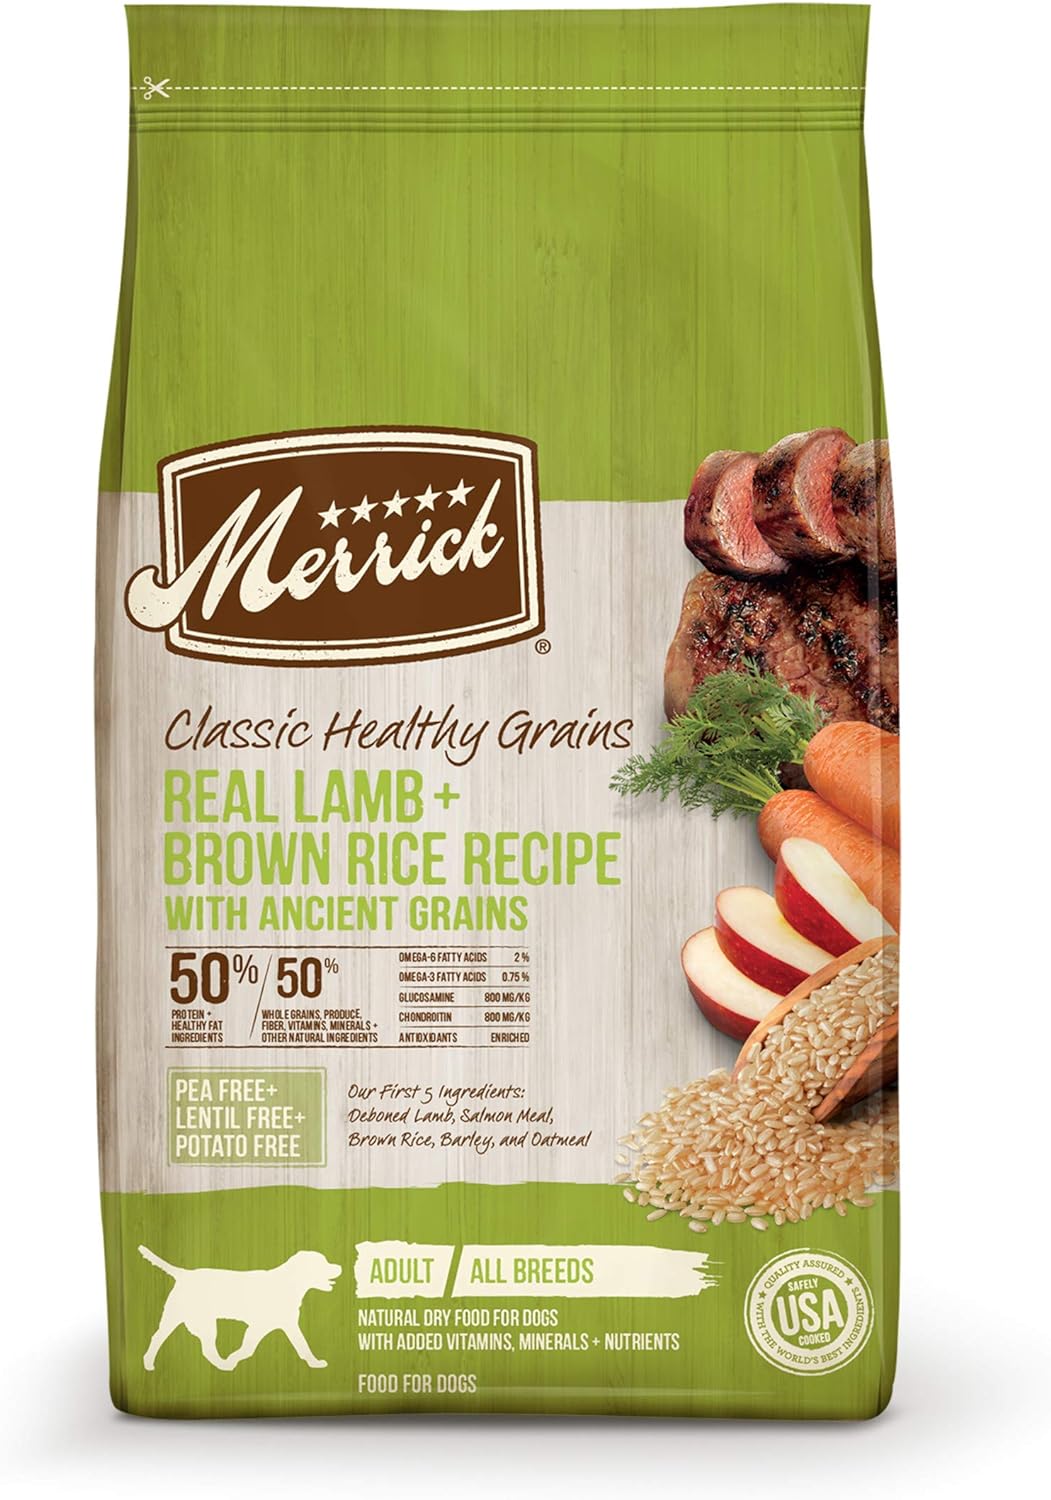 Merrick Classic Healthy Grains Real Lamb + Brown Rice Recipe with Ancient Grains Dry Dog Food – Gallery Image 1